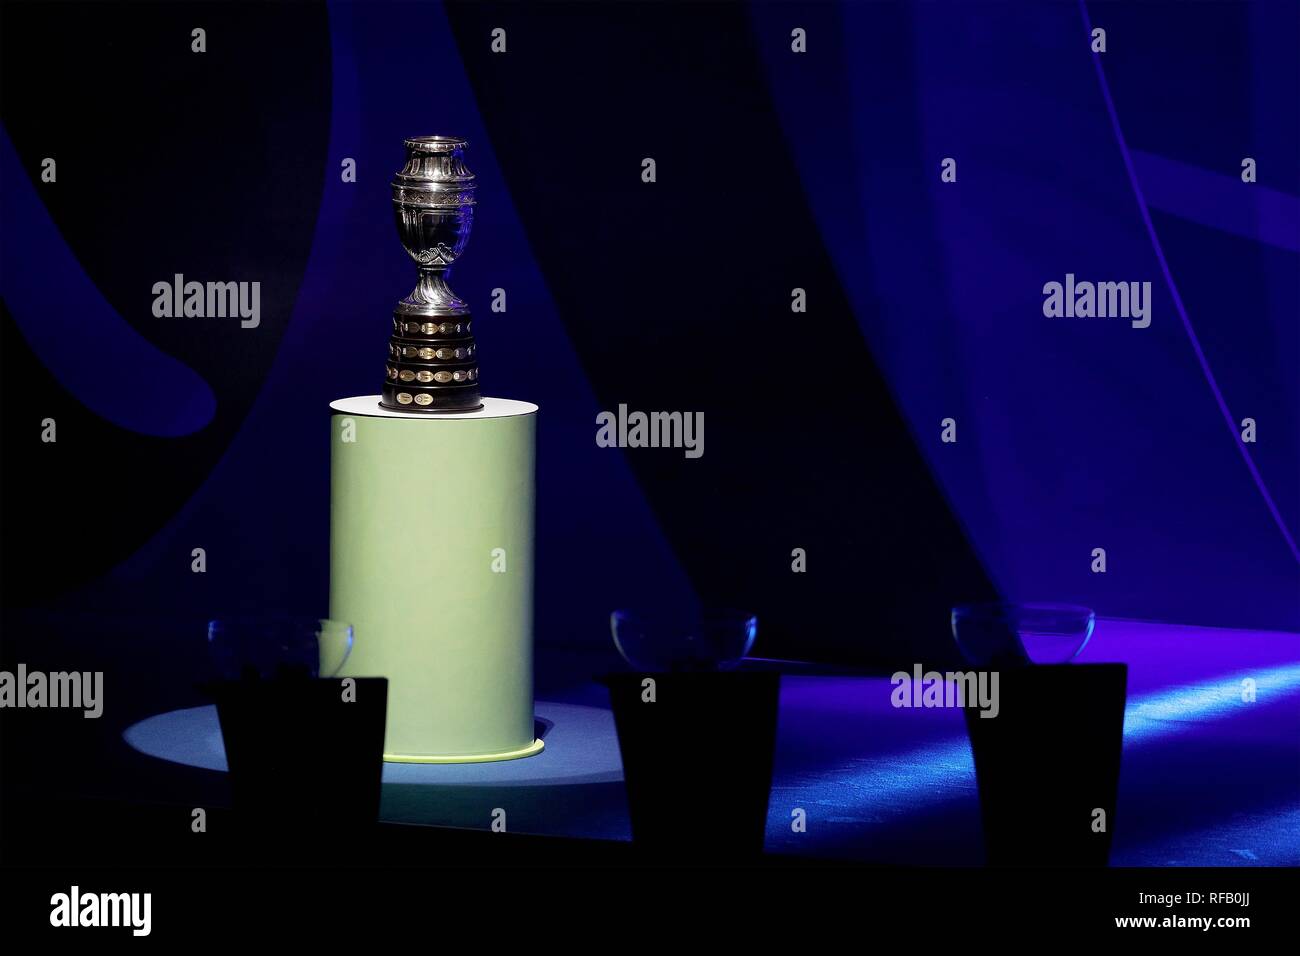 Rio De Janeiro. 24th Jan, 2019. Photo taken on Jan. 24, 2019 shows the trophy of the CONMEBOL Copa America at the official draw ceremony held in Rio de Janeiro, Brazil. The draw result was Brazil, Bolivia, Venezuela and Peru in Group A, Argentina, Colombia, Paraguay and Qatar in Group B, Uruguay, Ecuador, Japan and Chile in Group C. The tournament will be held from June 14 to July 7 in 5 cities in Brazil. Credit: Li Ming/Xinhua/Alamy Live News Stock Photo